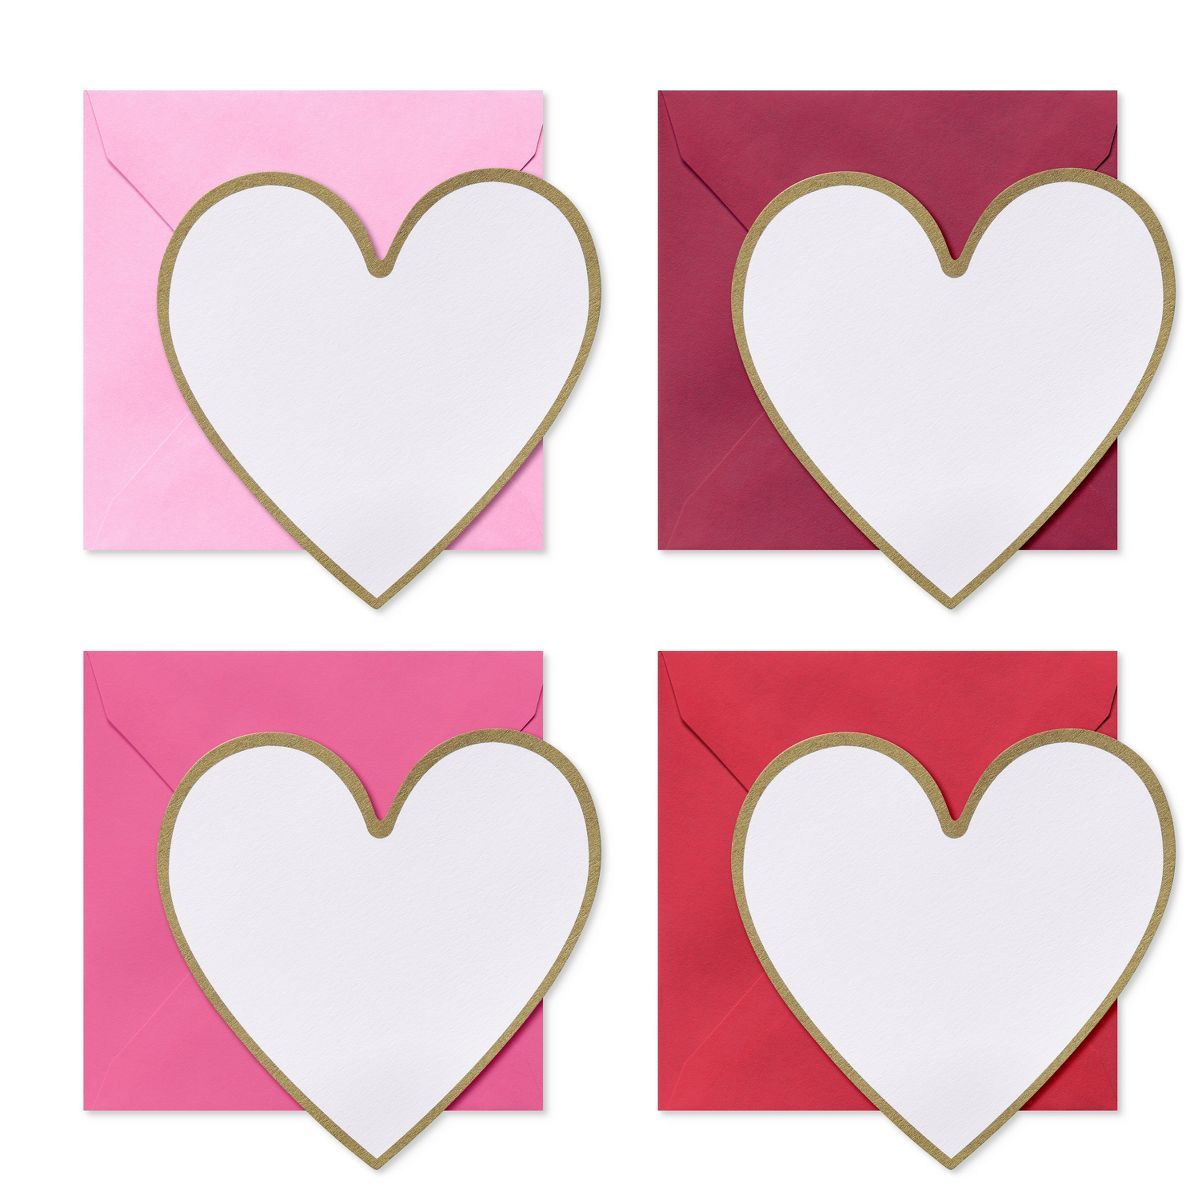 12ct Heart Shaped Mini Notes for Classroom | Target